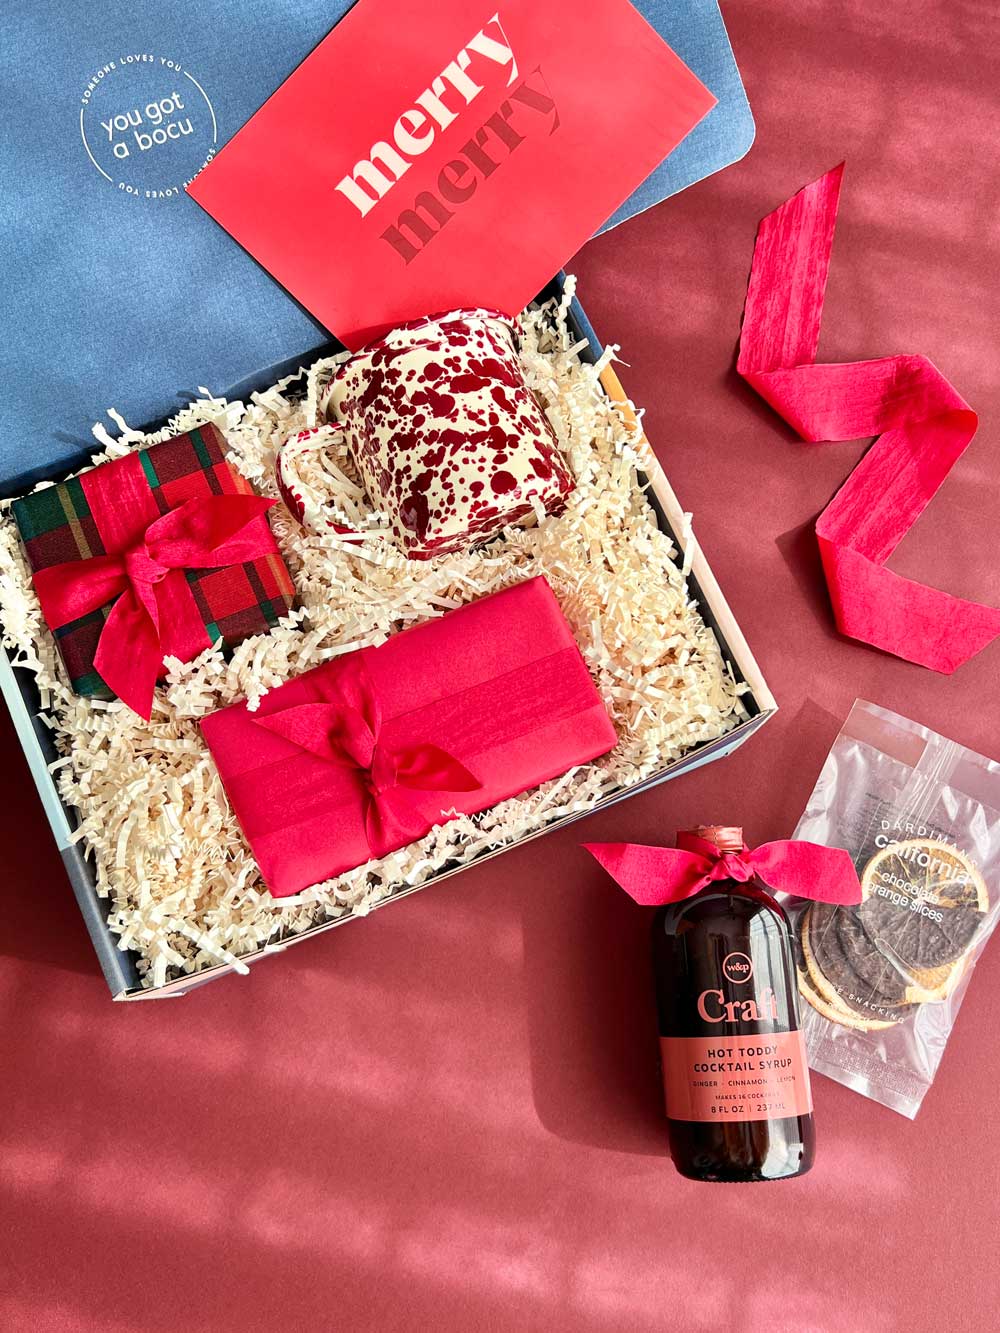 The Hot Toddy Gift Box